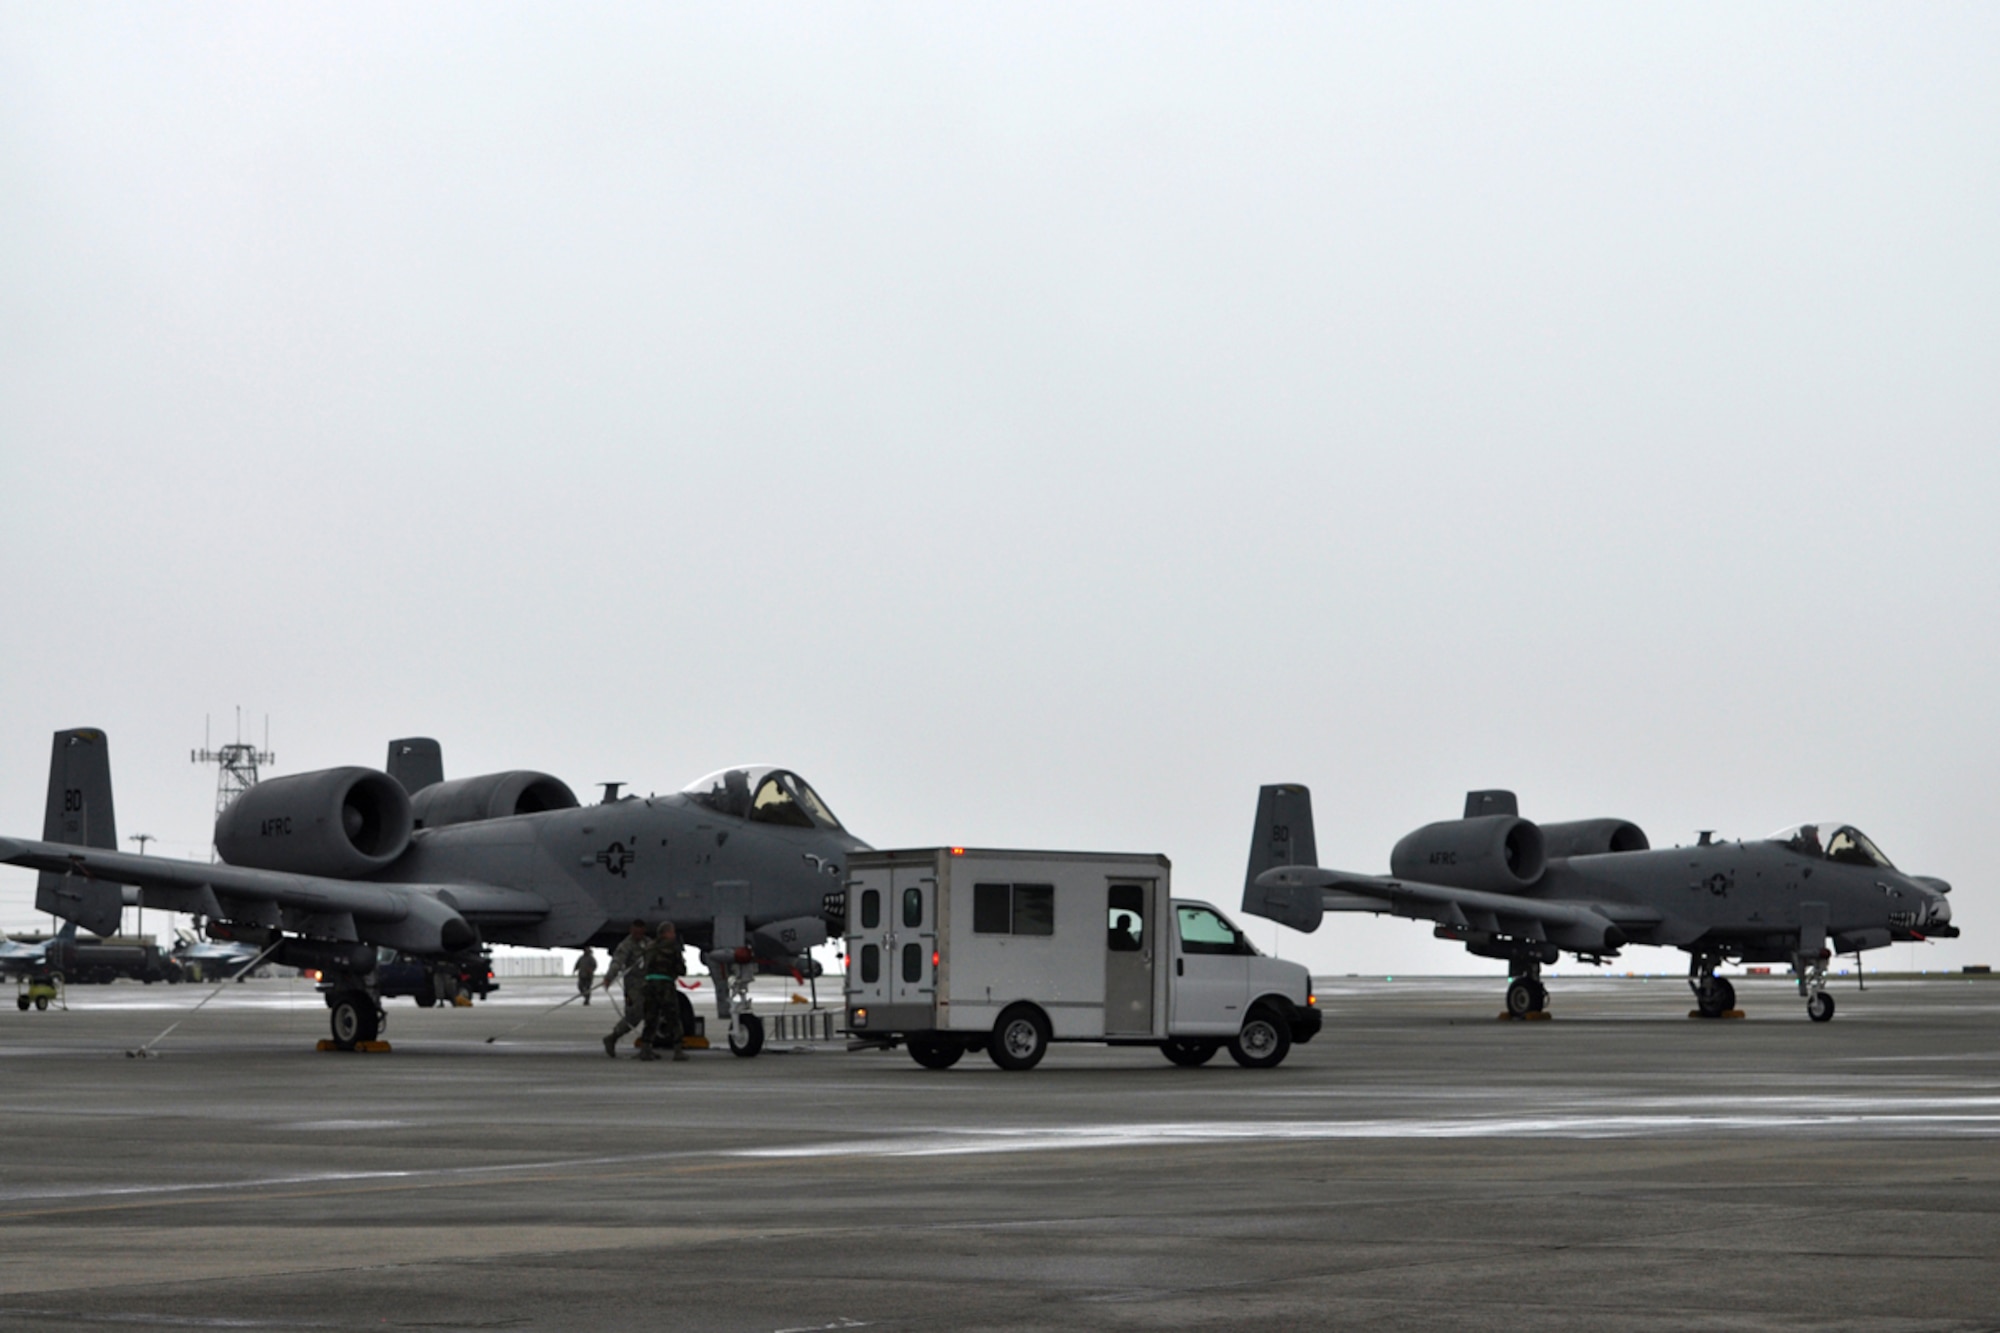 Airmen from the 917th Wing at Barksdale Air Force Base, La., scramble to secure A-10 Thunderbolts on the ramp as a white wall of rain bears down on the jets at the Savannah Combat Readiness Training Center in Savannah, Ga., April 2, 2009. Airmen from the 917th WG and the 47th Fighter Squadron both from Barksdale were involved in training Joint Terminal Attack Controllers for 13 days during “Patriot Dixie.” (US Air Force photo/Tech. Sgt. Jeff Walston)